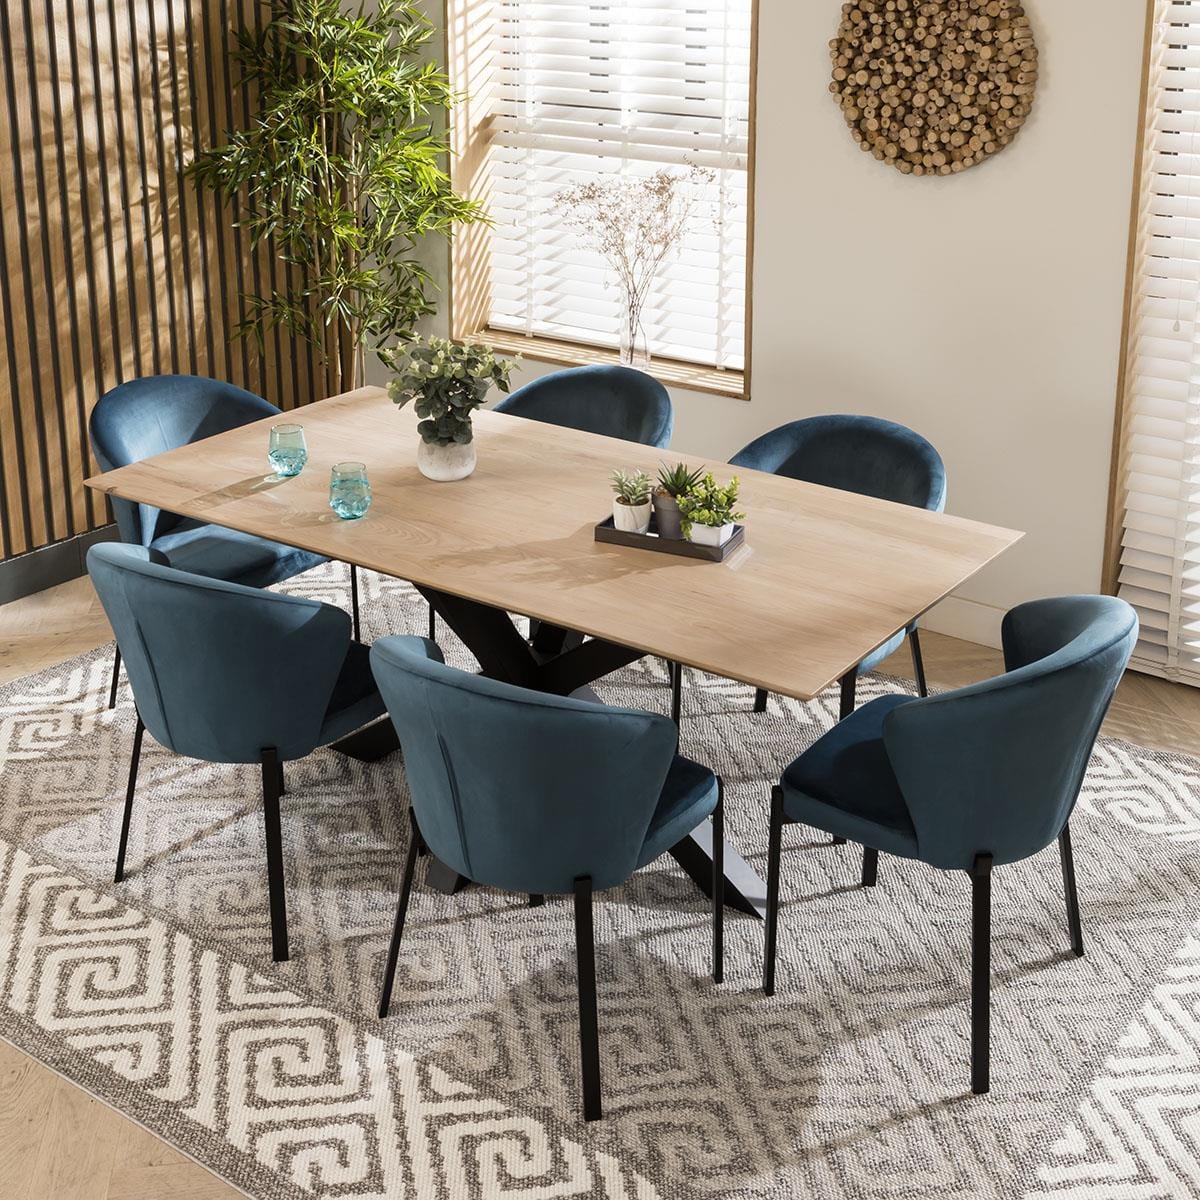 Quatropi Zoe Solid Natural 6 Seat Wooden Dining Table And Chairs Set Blue